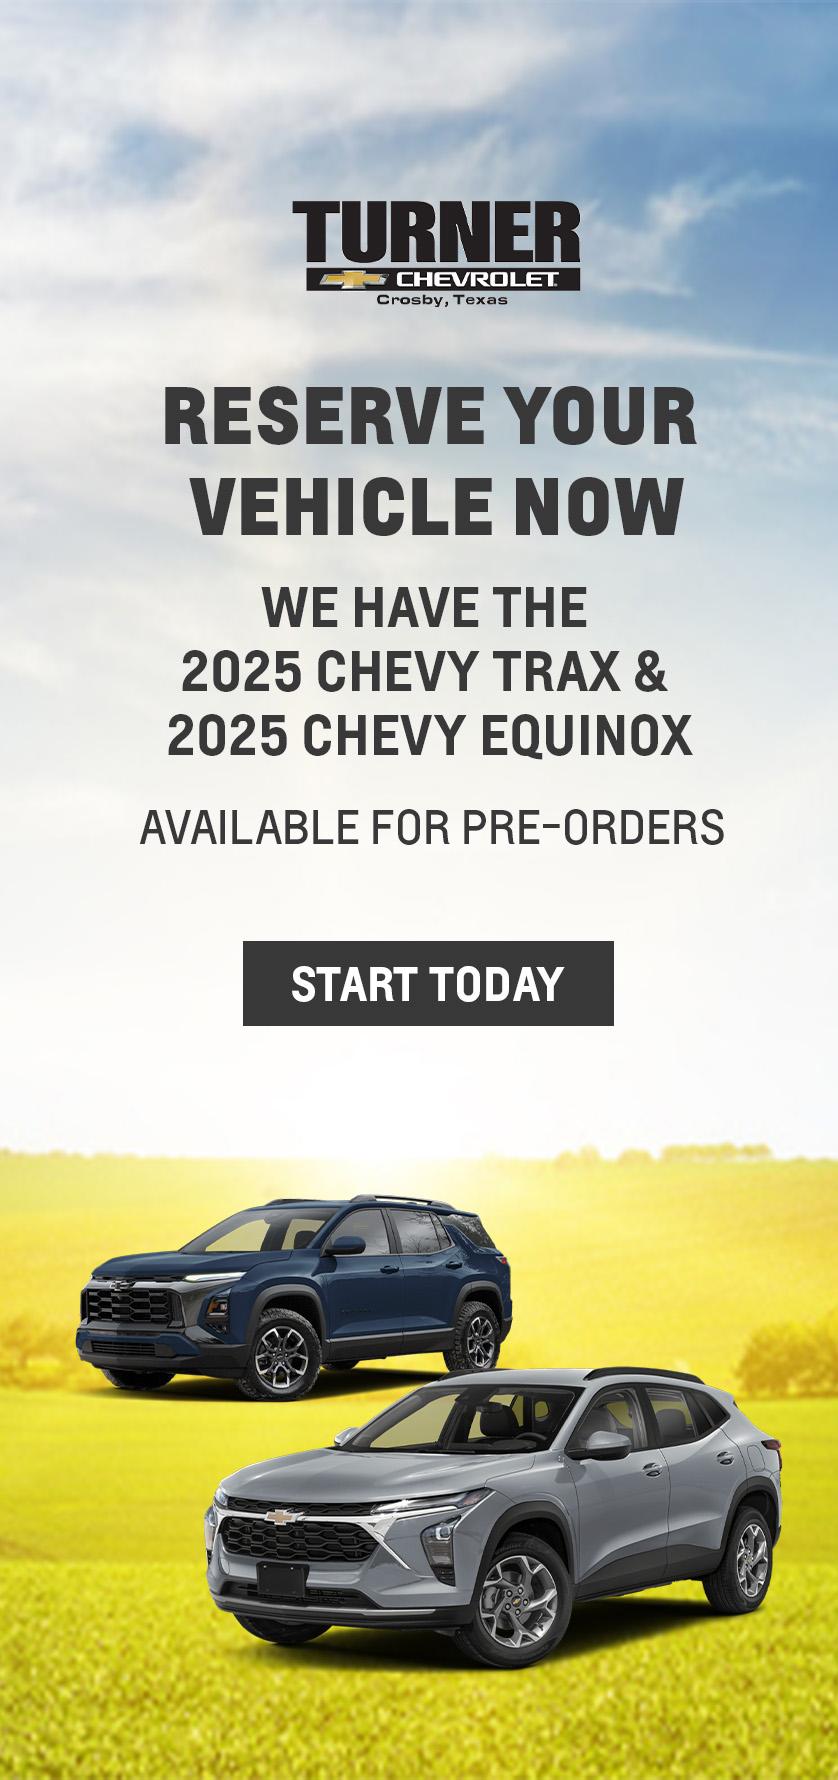 Reserve your vehicle now